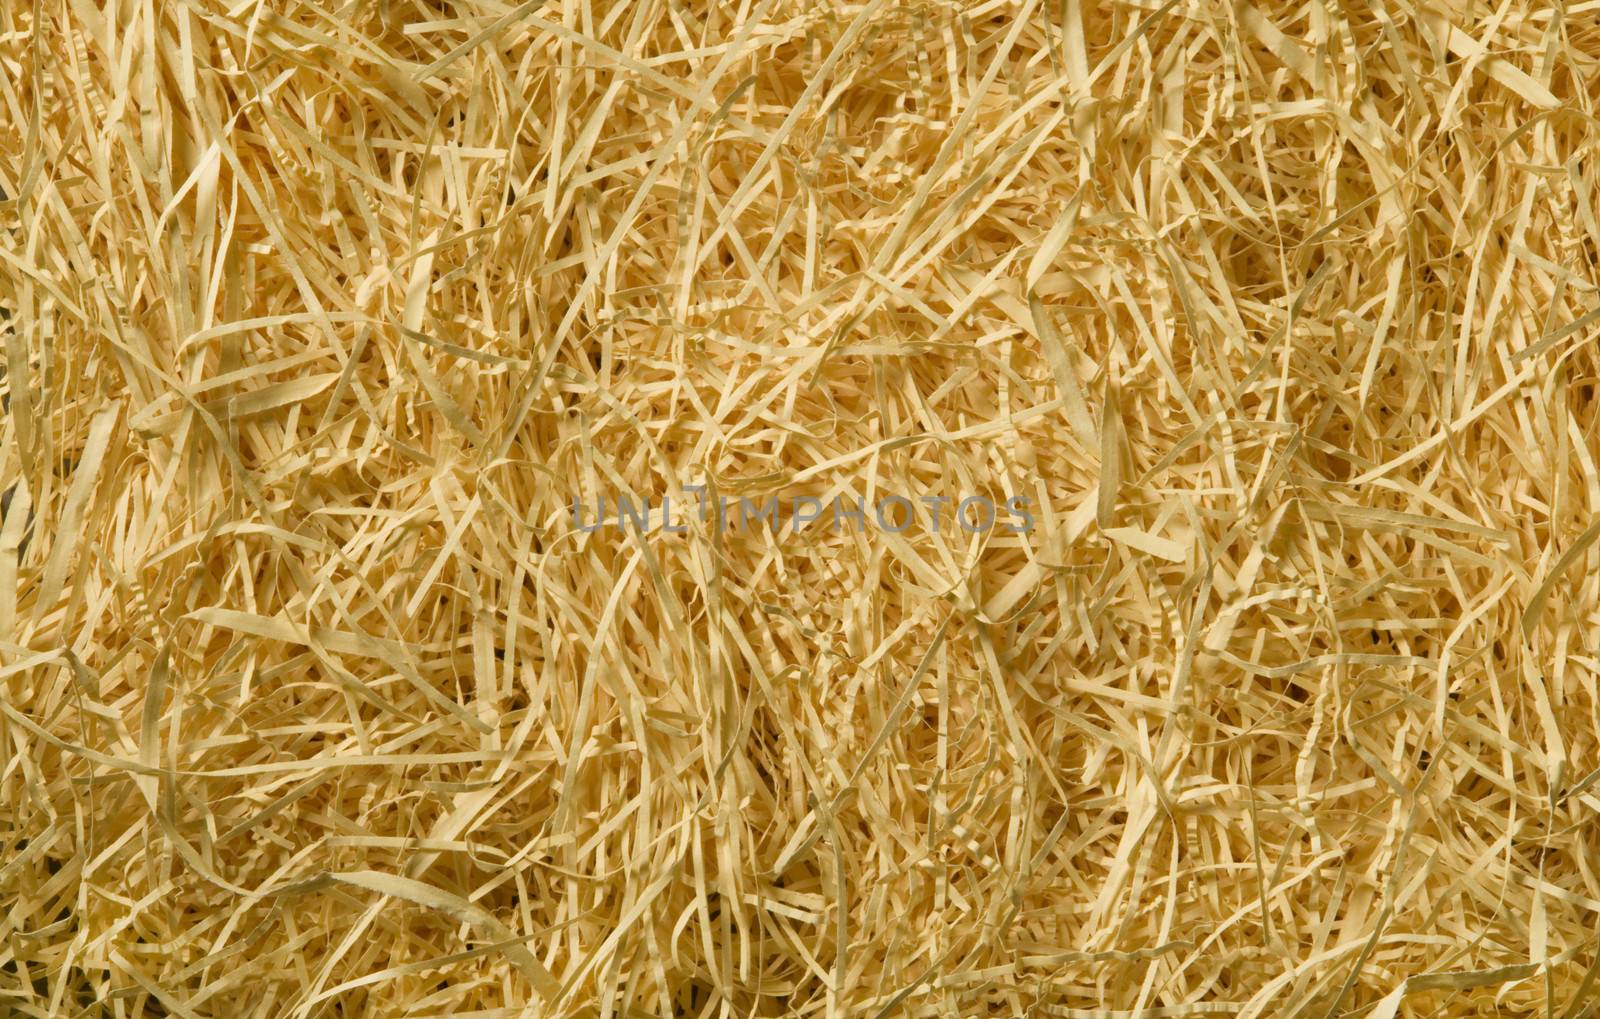 Yellow packing straw material background by Balefire9